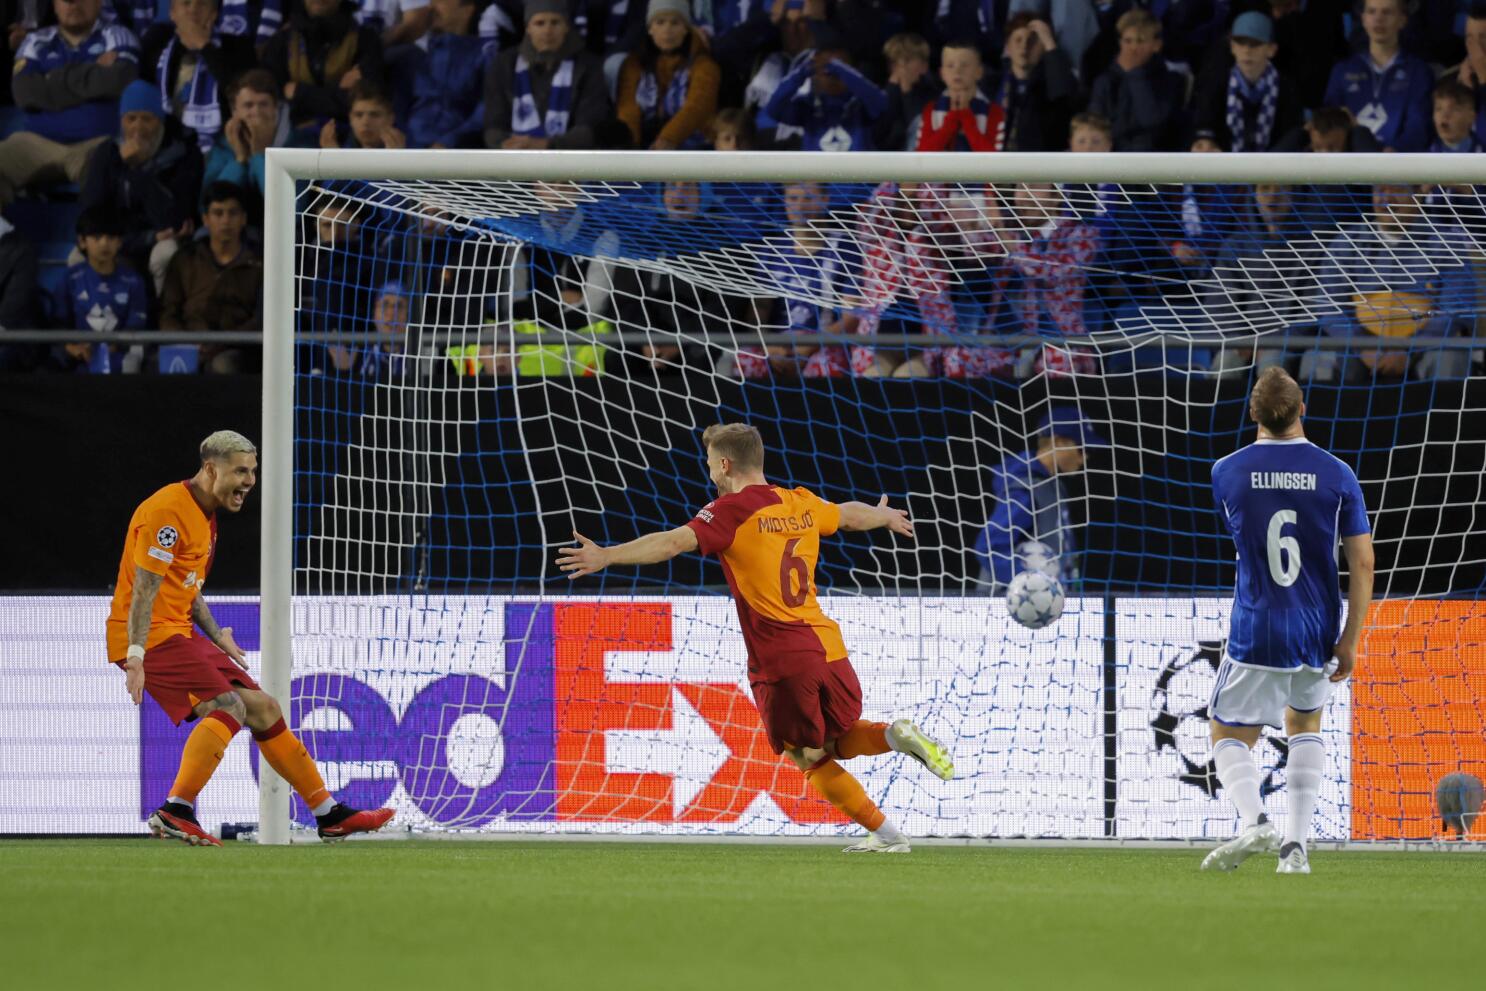 Mauro Icardi's goal and late assist lift Galatasaray to 3-2 win at Molde in  Champions League playoff - The San Diego Union-Tribune